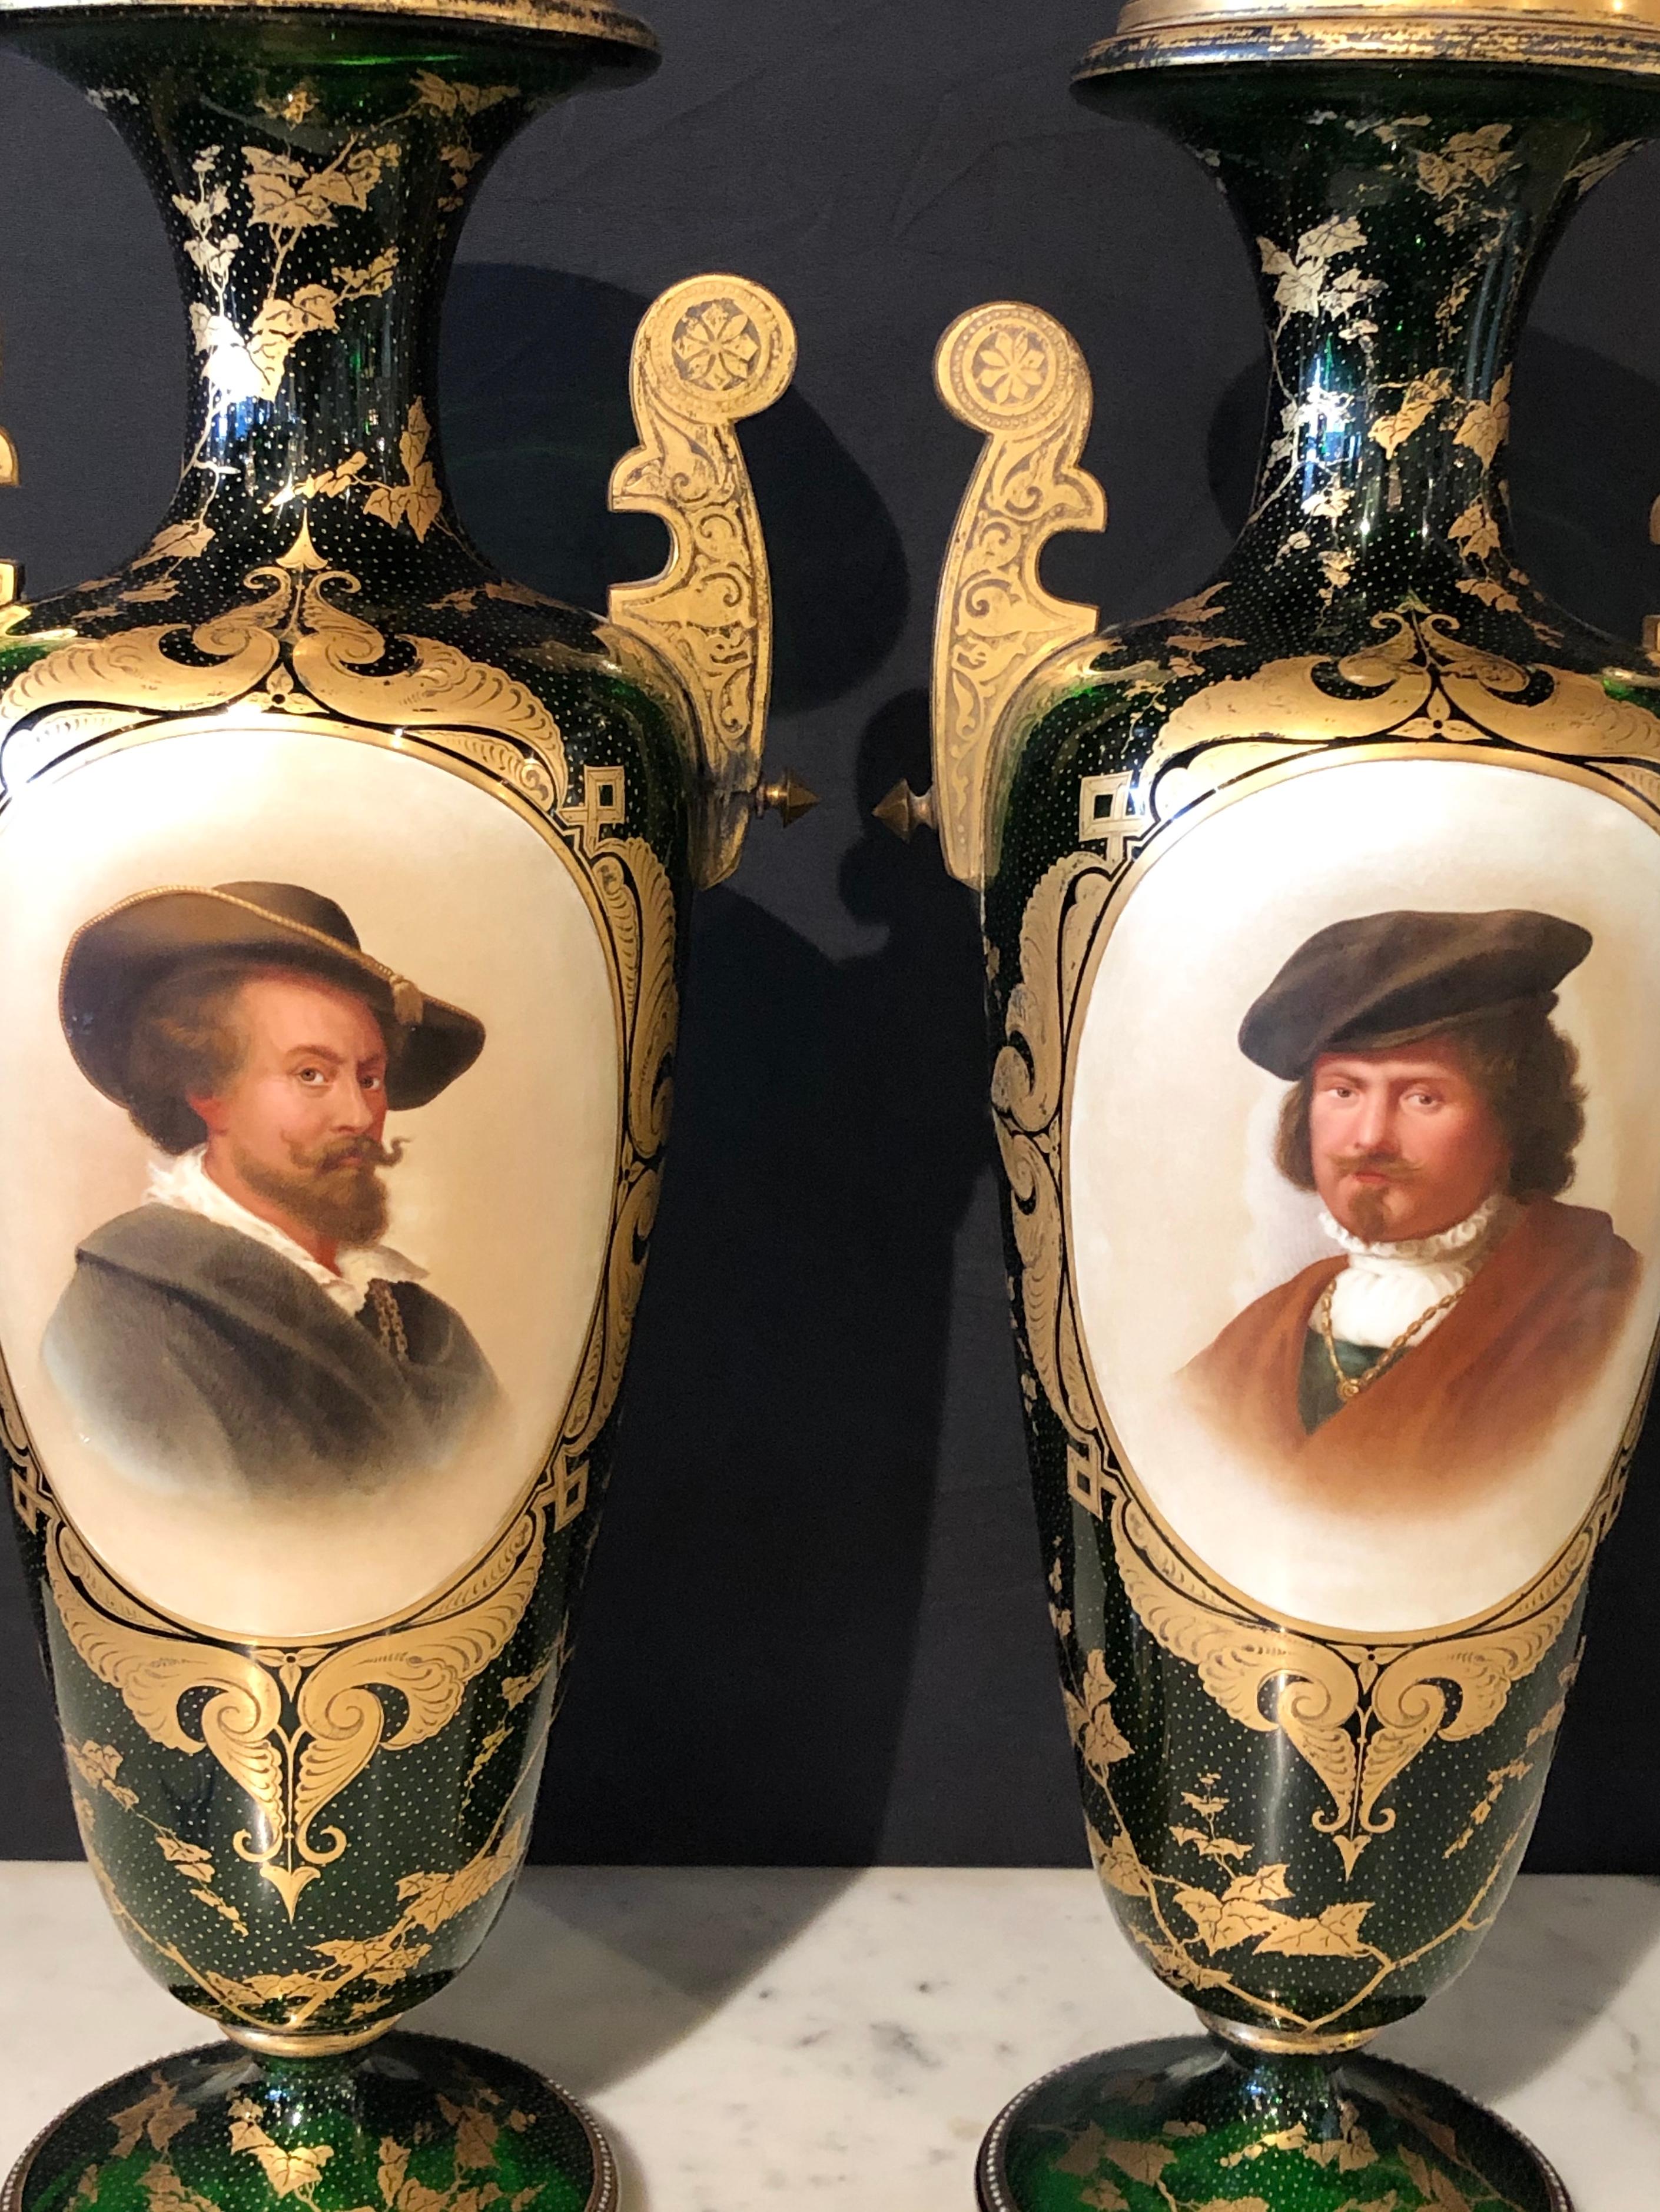 Pair of French portrait decorated green glass vases. This fine high stylized pair of decorated green glass vases have a gilt trim with portrait applied panels. The pair with gilt gold glass handles flanking finely painted portraits of two hatted